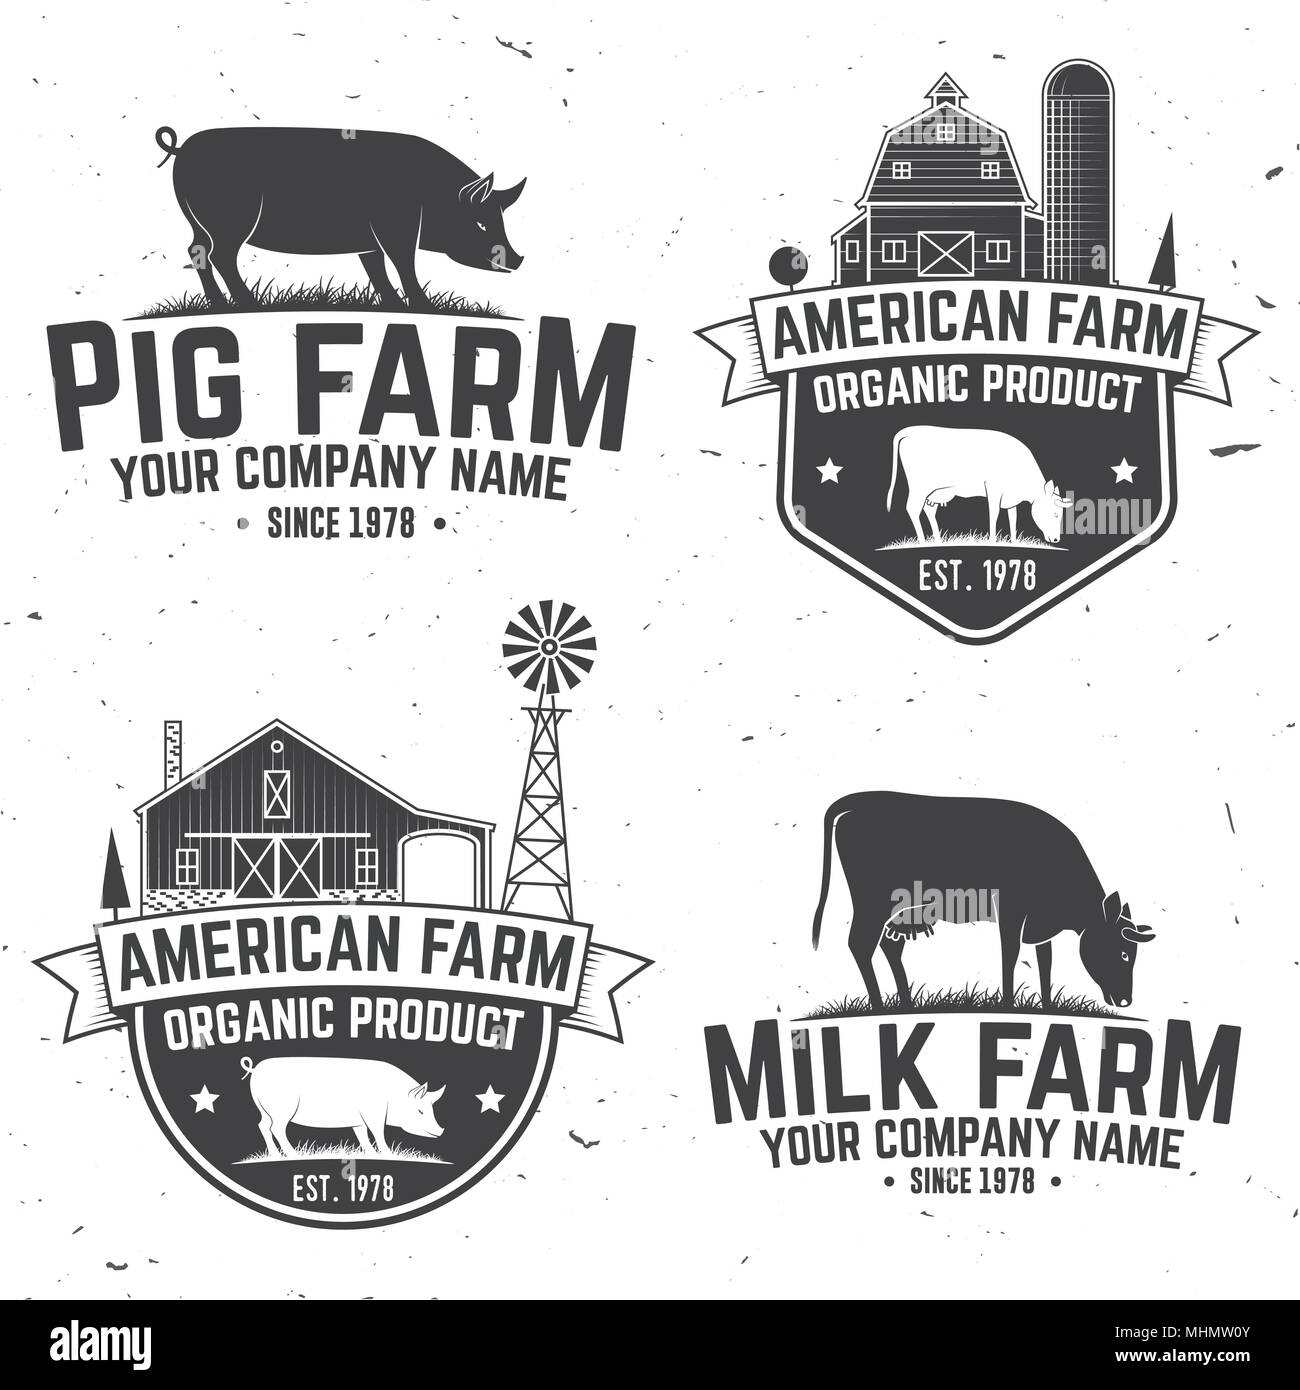 American Farm Badge or Label. Vector illustration. Vintage typography design with cow, pig and farm house silhouette. Elements on the theme of the pork farm business. Stock Vector